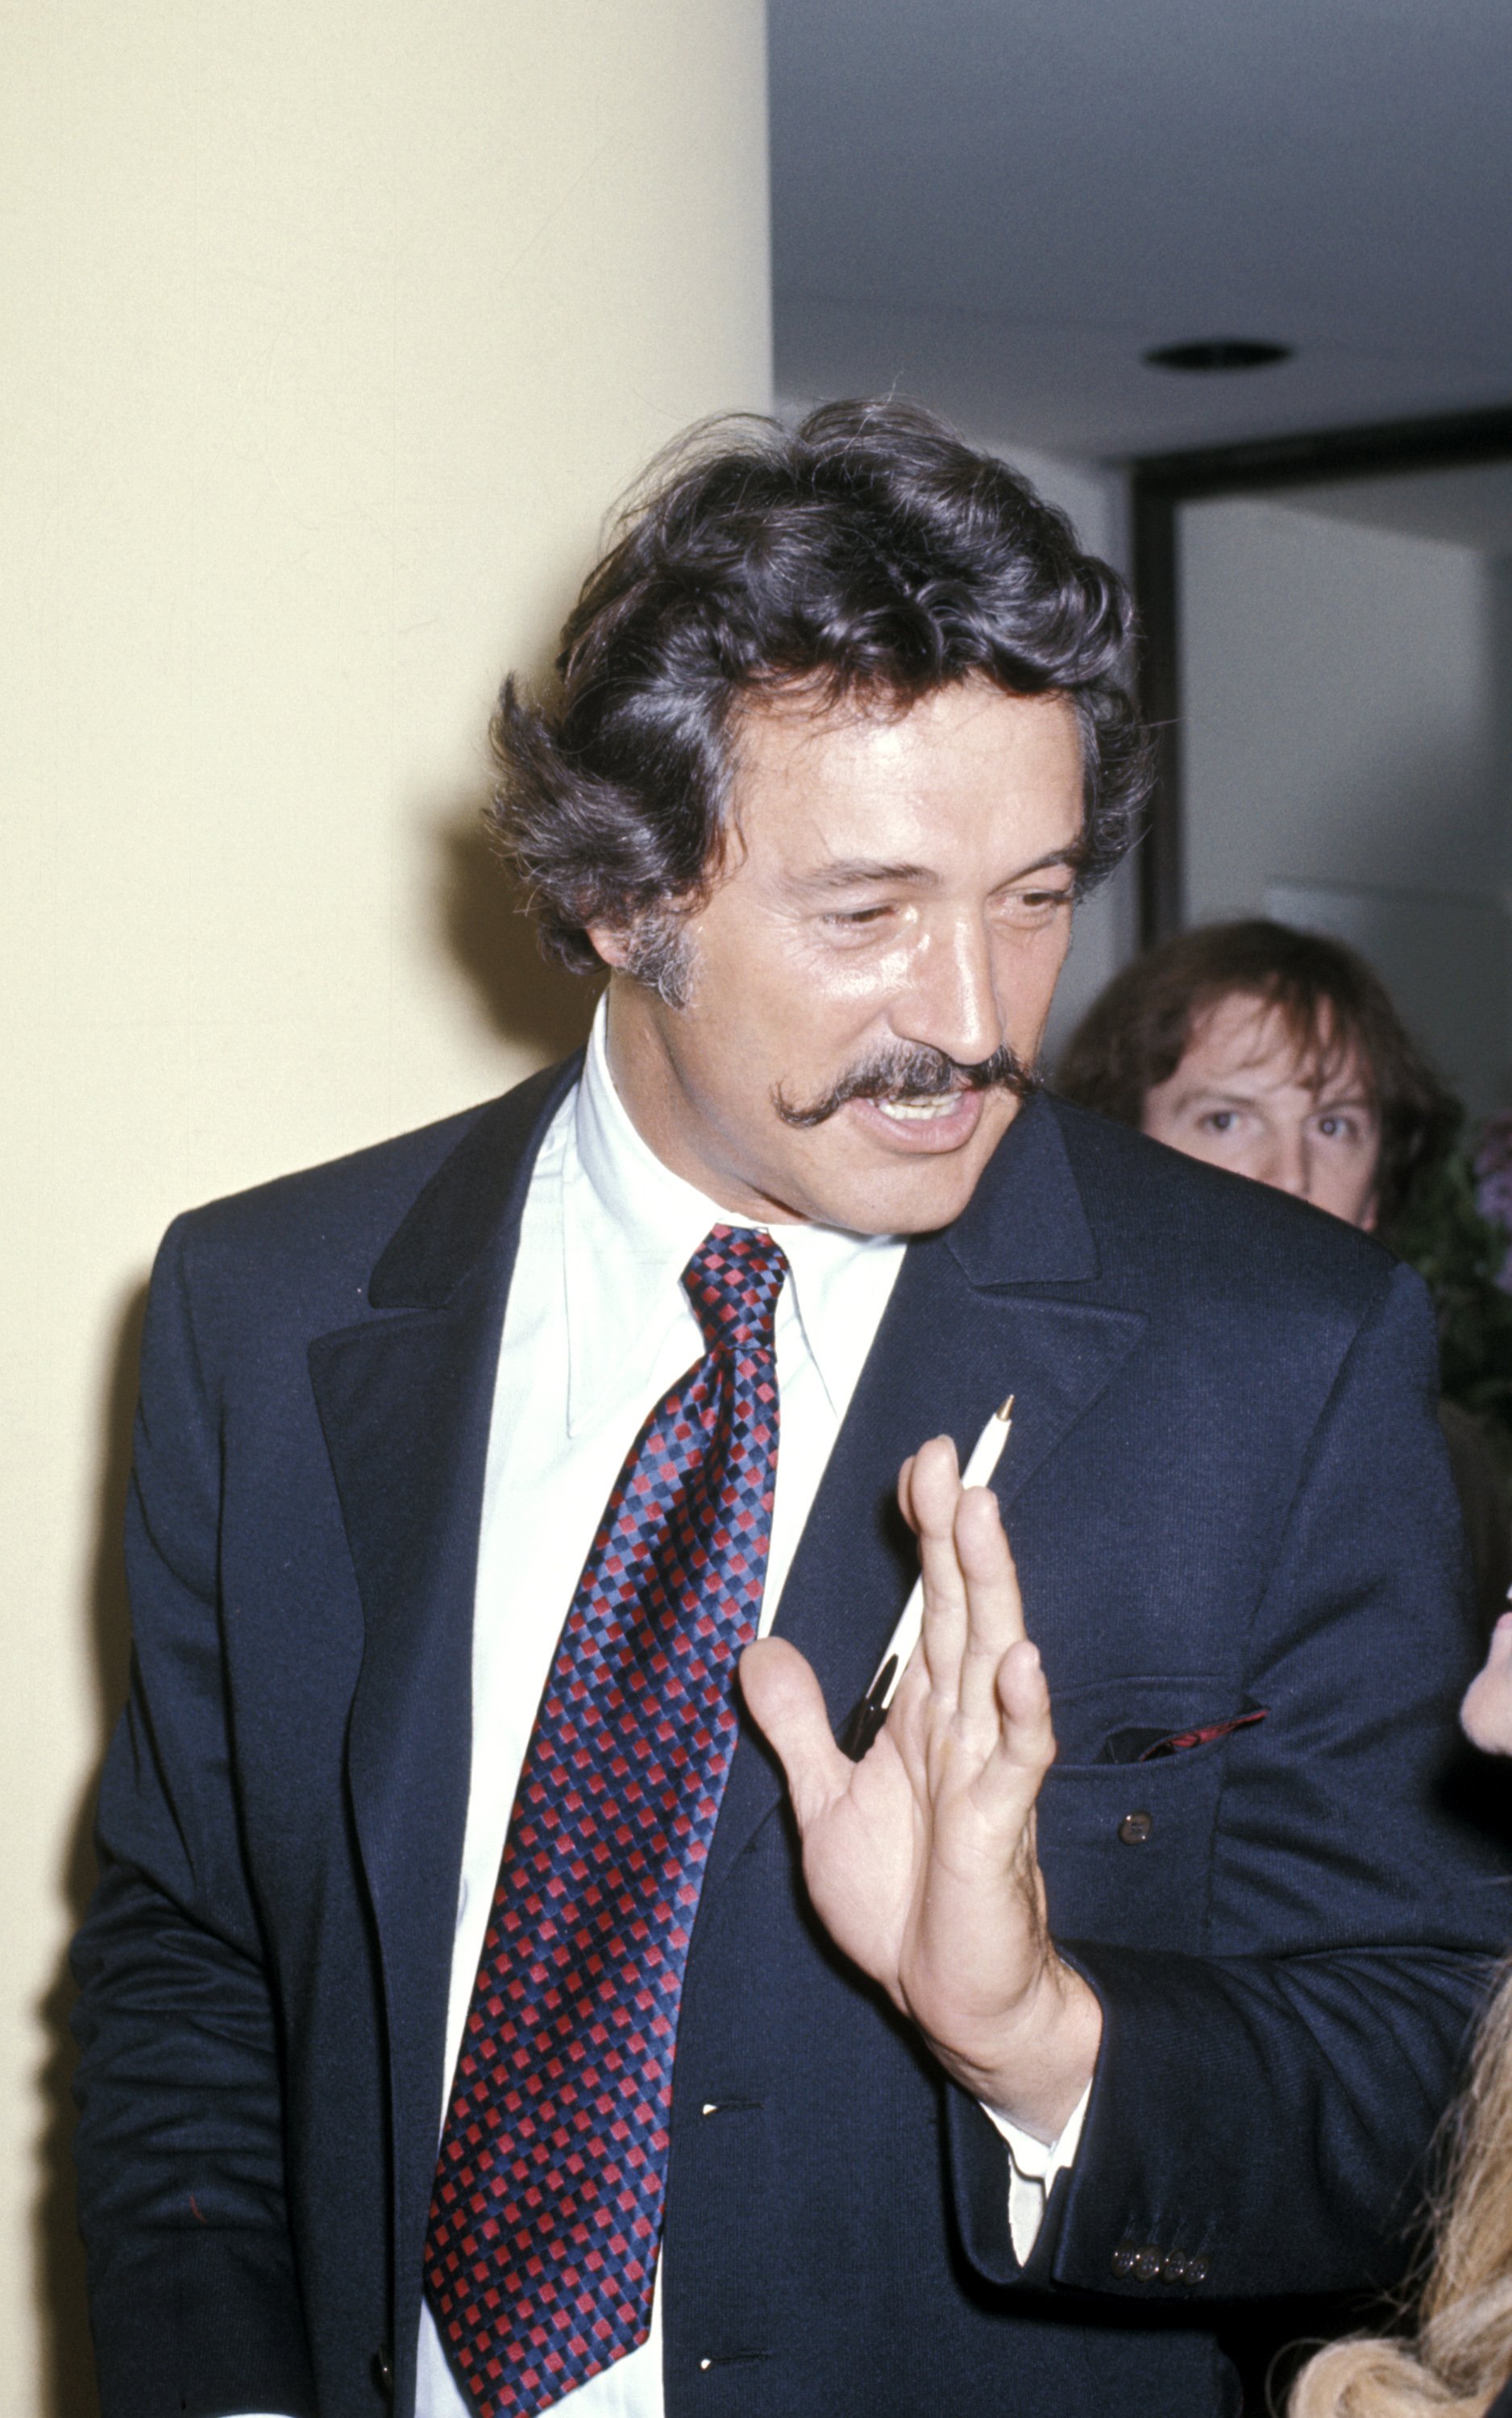 Rock Hudson during Rod McKuen's 37th Birthday Party at Philaharmonic Hall in new, New York, United States, circa 1970 | Source: Getty Images